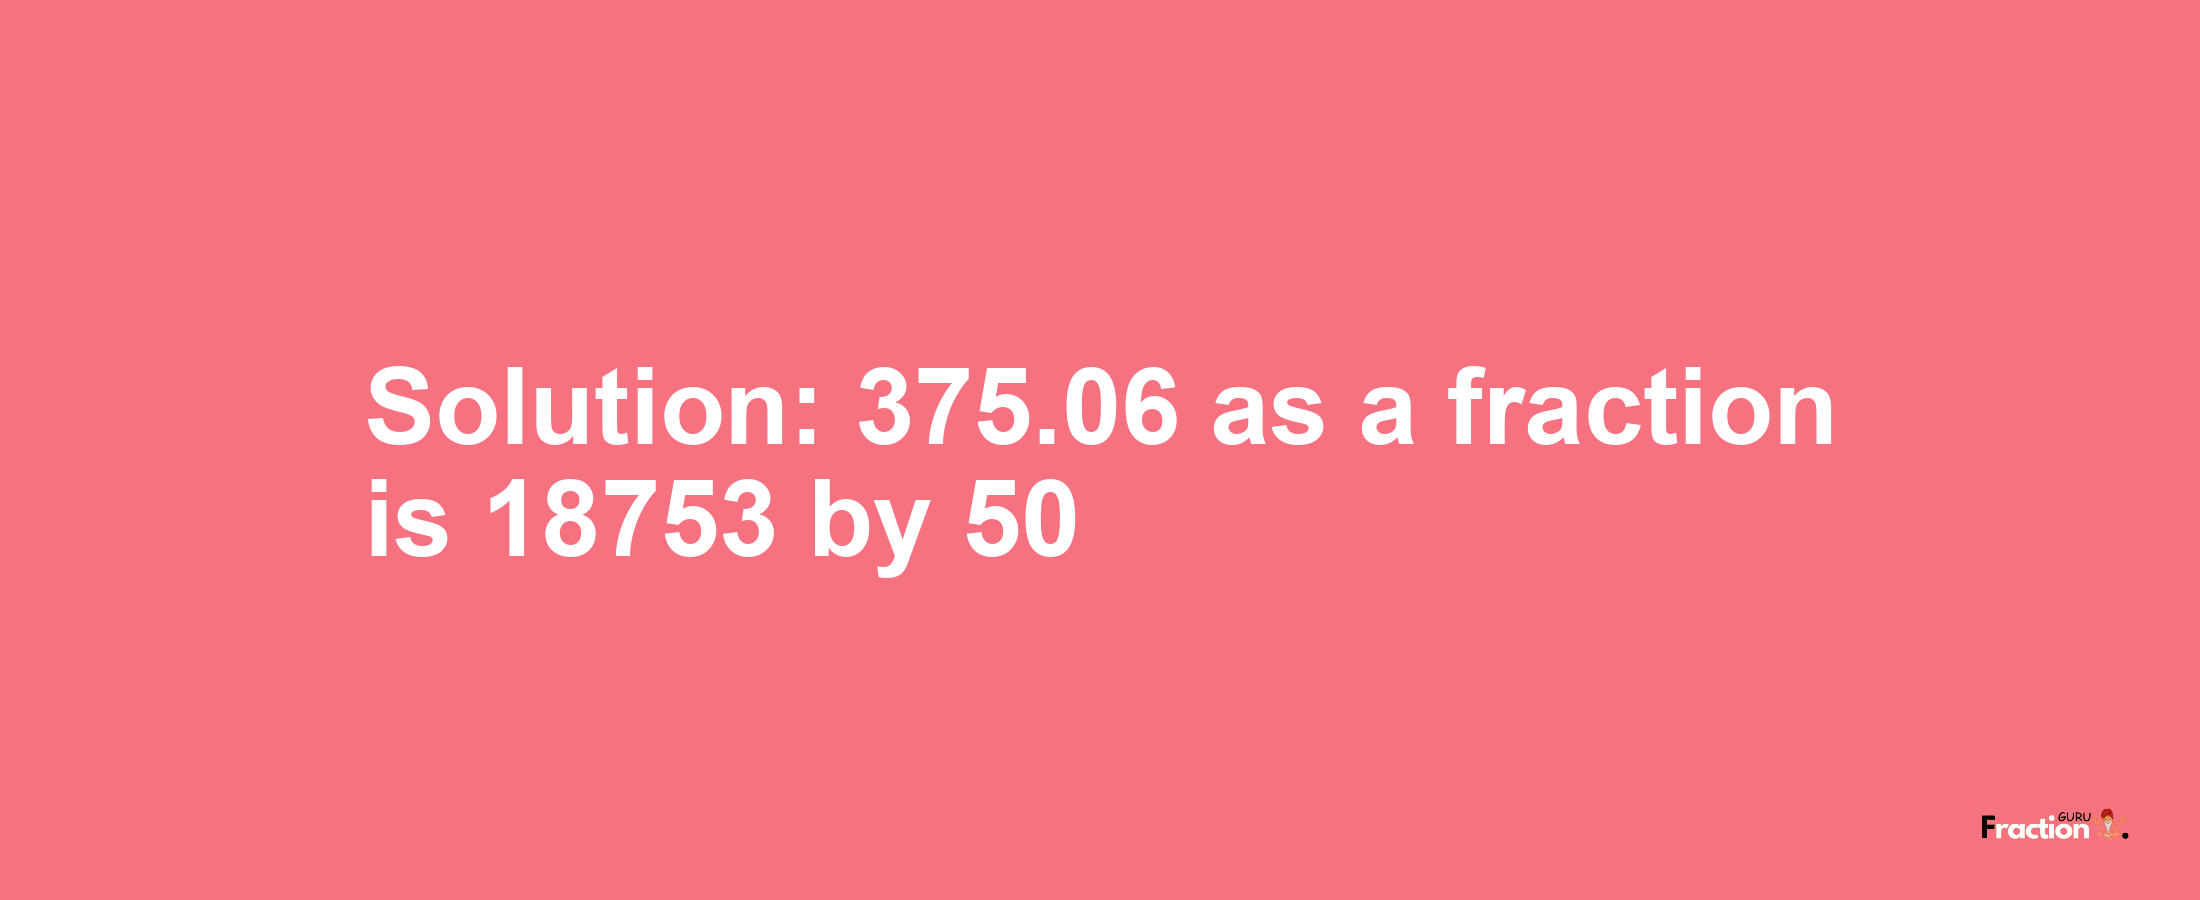 Solution:375.06 as a fraction is 18753/50